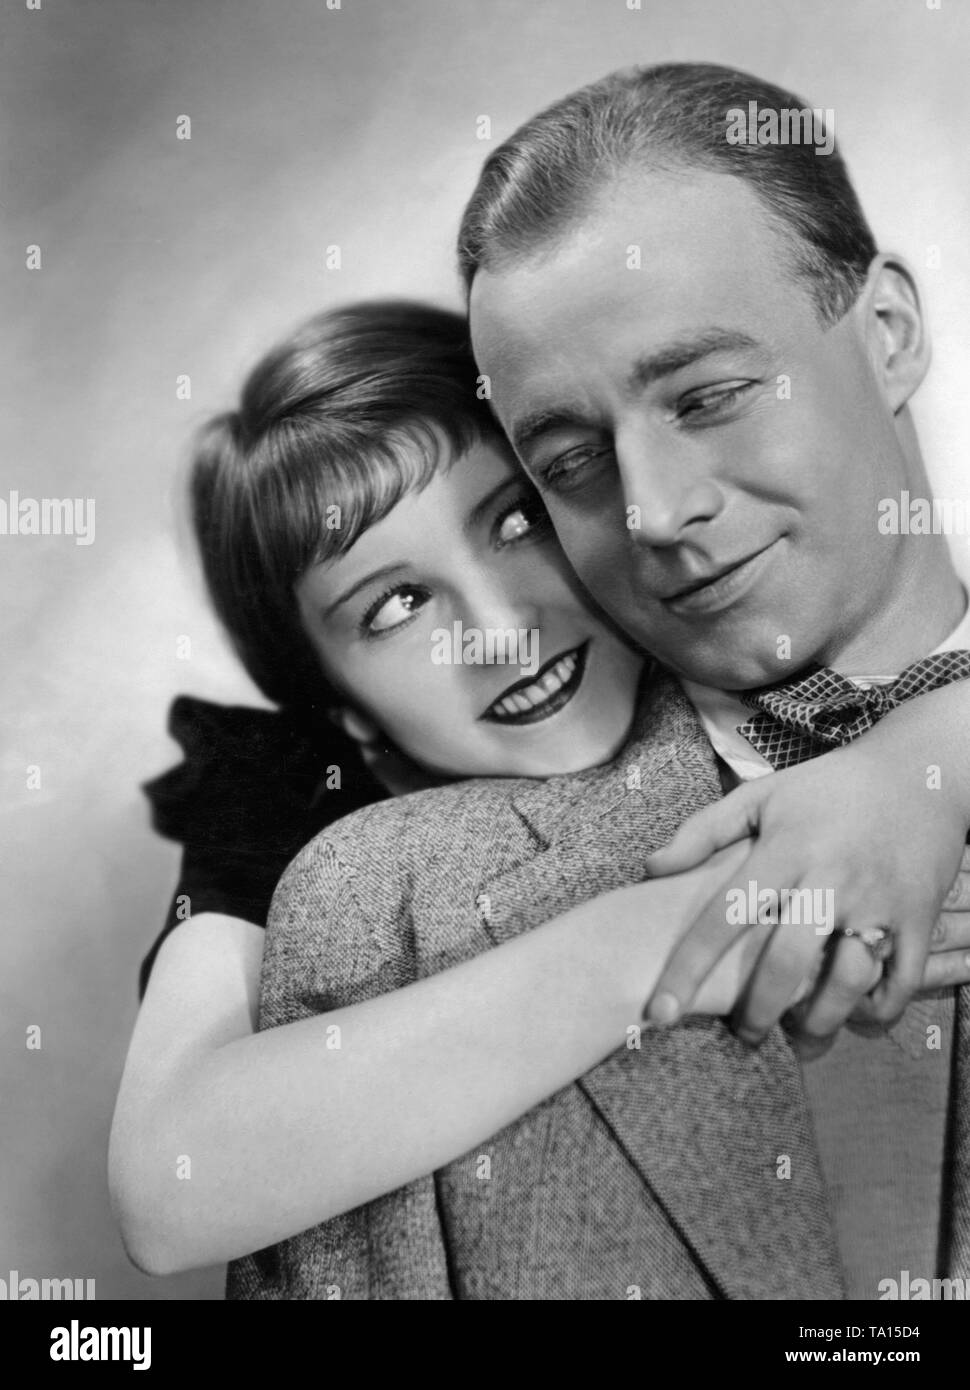 Heinz Ruehmann as Fred Holmes and Dolly Haas as Edith Ringler in the feature film 'Things Are Getting Better Already' by Kurt Gerron. This movie has disappeared. Stock Photo